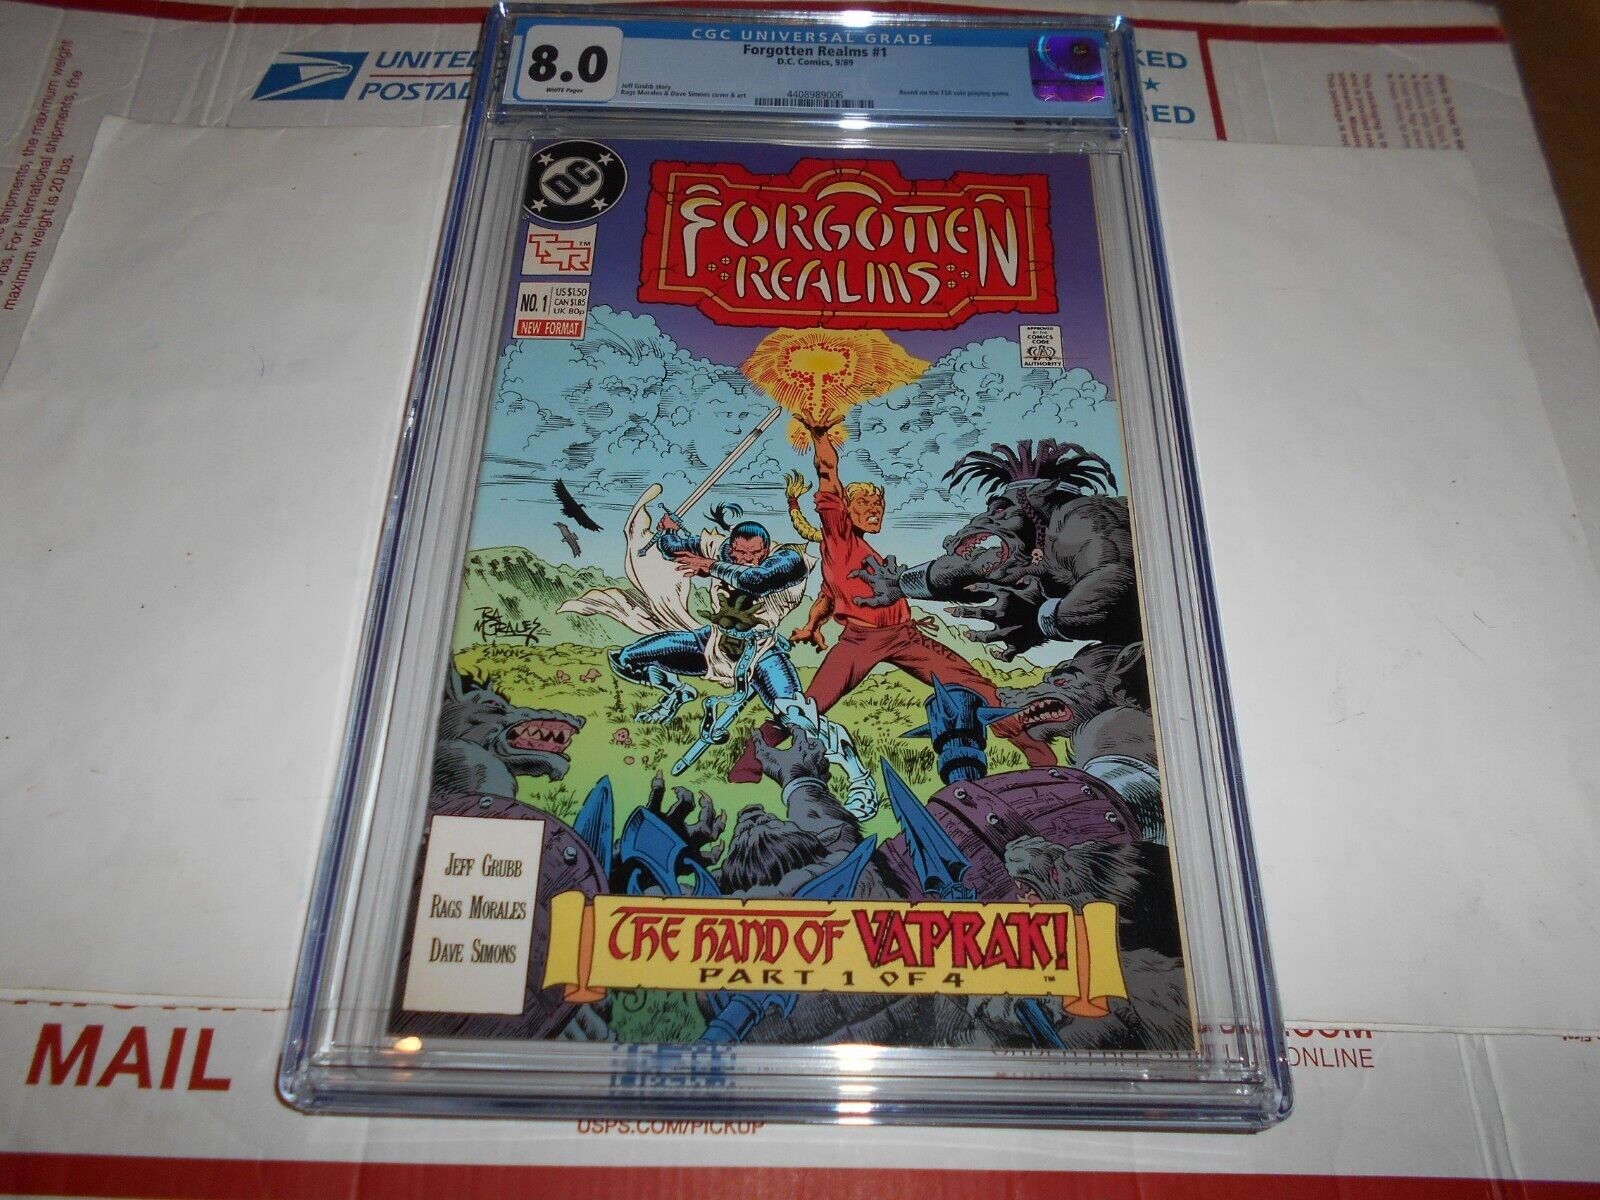 FORGOTTEN REALMS #1 CGC 8.0 (COMBINED SHIPPING AVAILABLE)